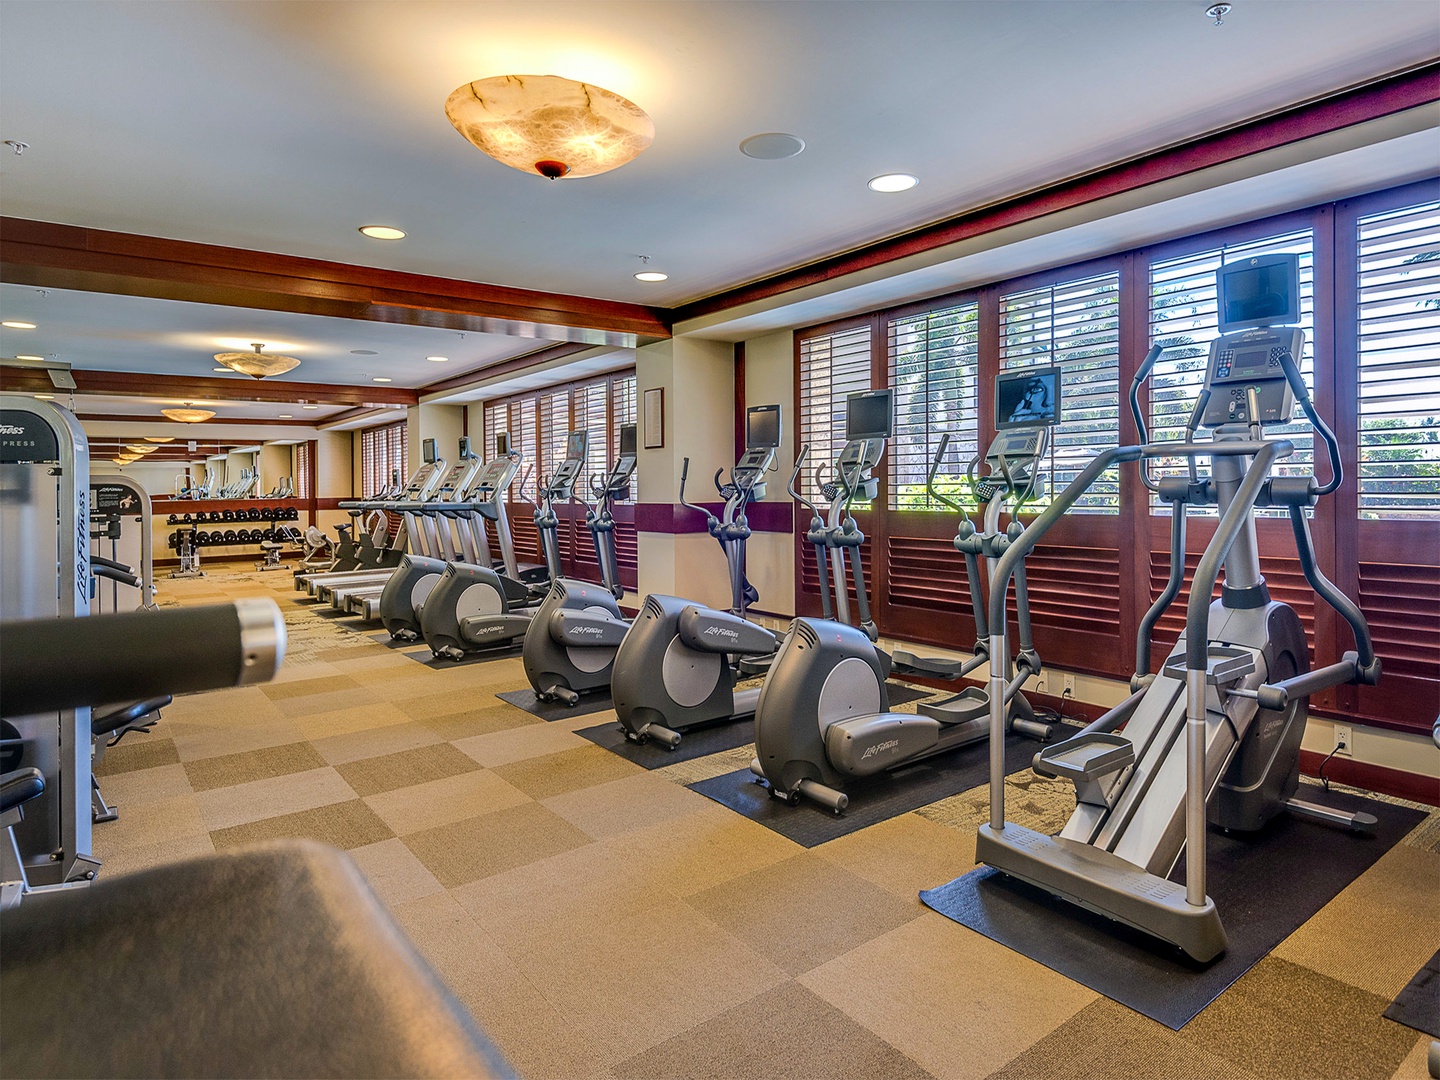 Kapolei Vacation Rentals, Ko Olina Beach Villas B706 - The state of the art fitness center for your renewal and self care.